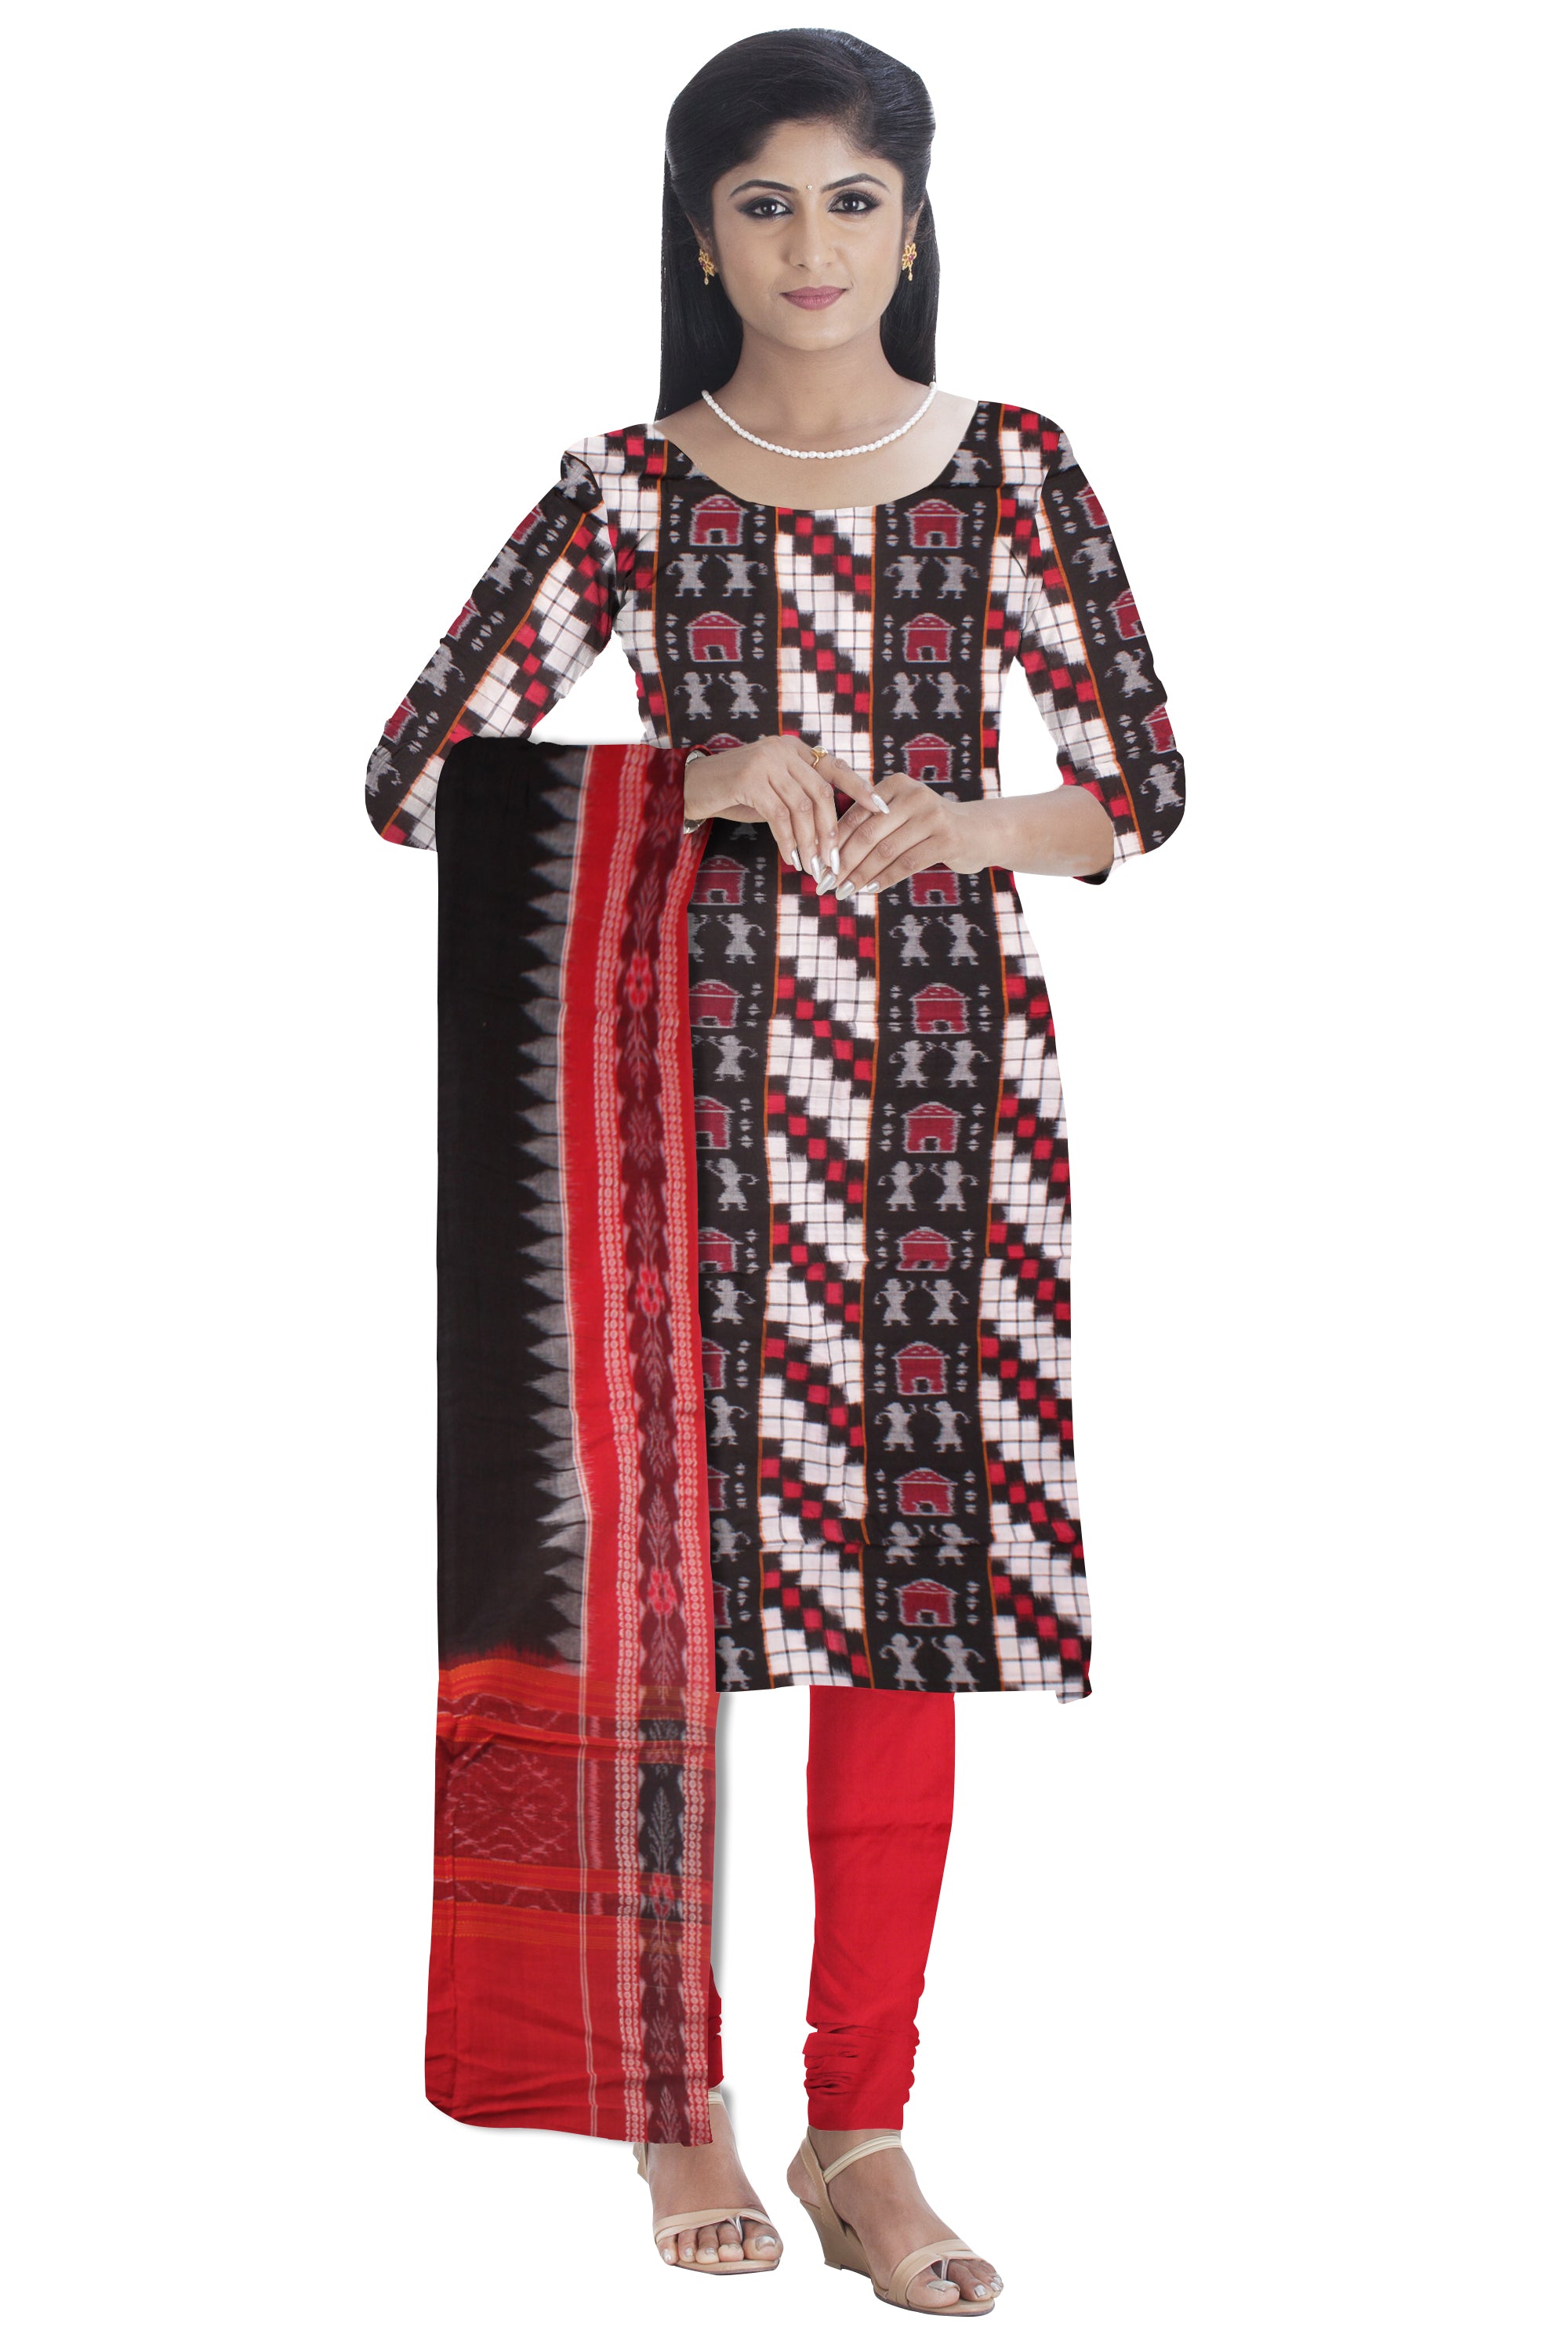 Cotton Dress Material in terracotta and pasapali pattern White, Red and Black color. Black and red colour  Dupatta  UNSTITCHED DRESS SET - Koshali Arts & Crafts Enterprise